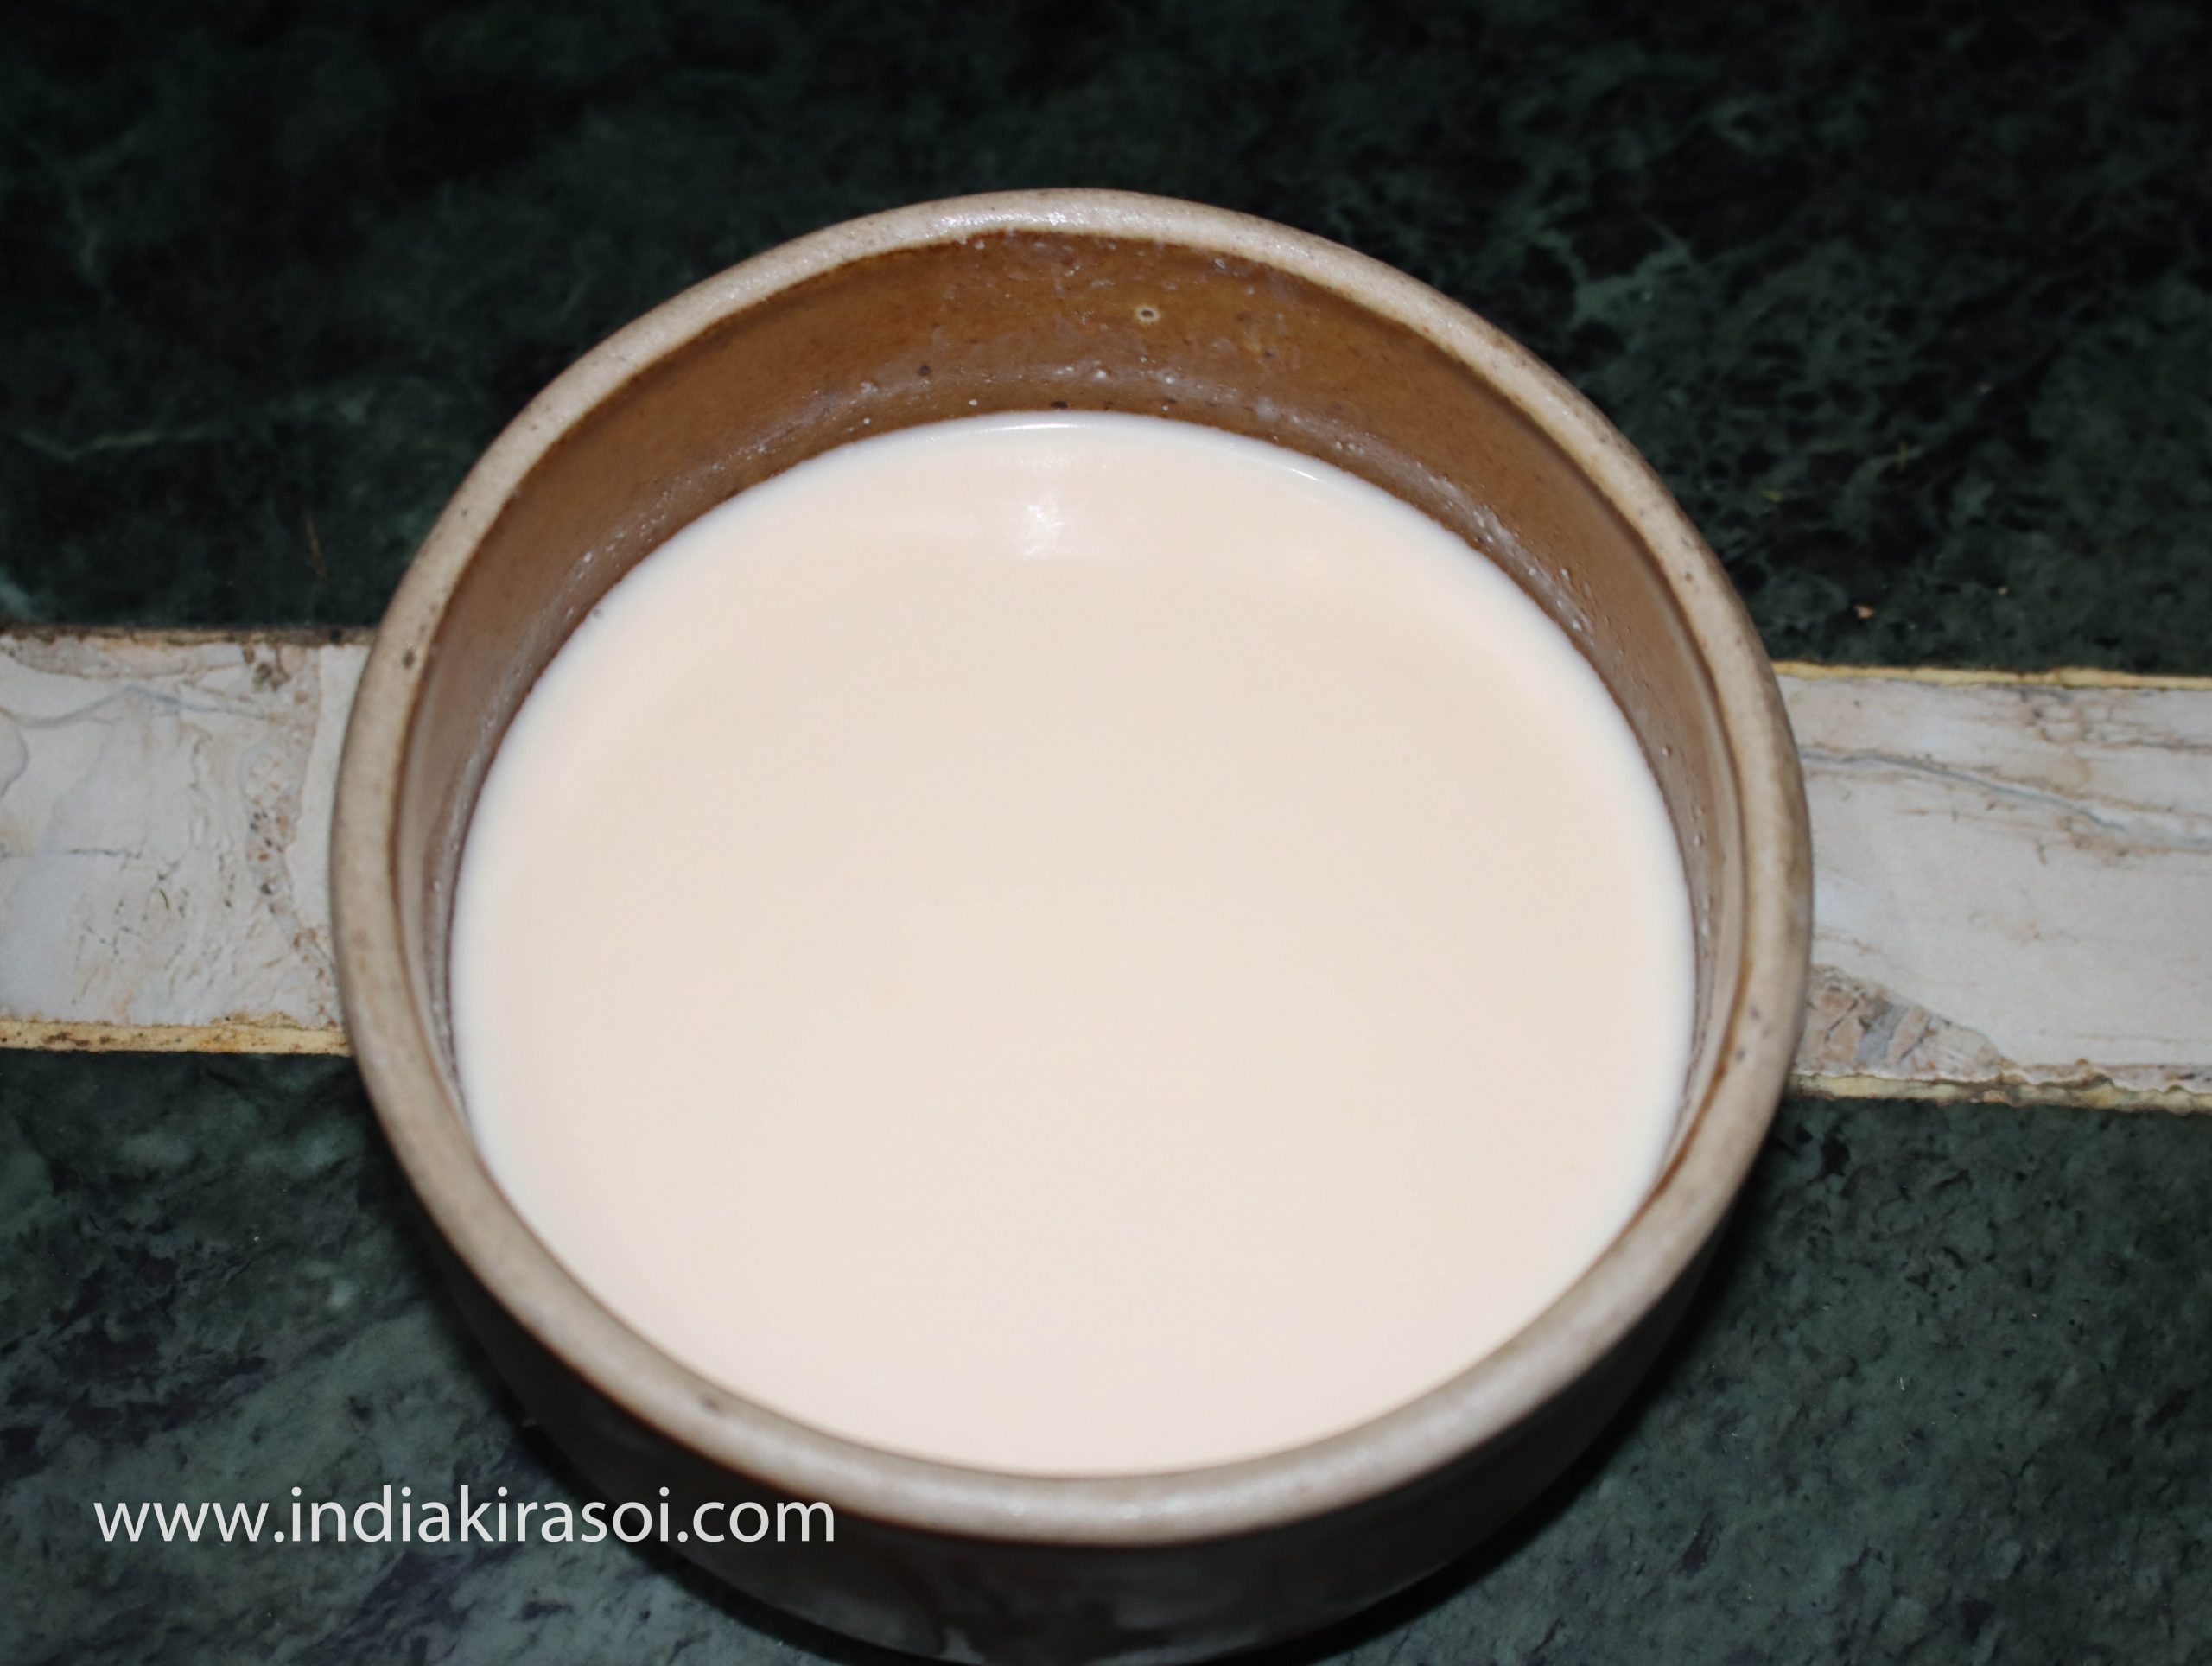 First take 250 grams of whey/ mattha in a vessel or bowl.